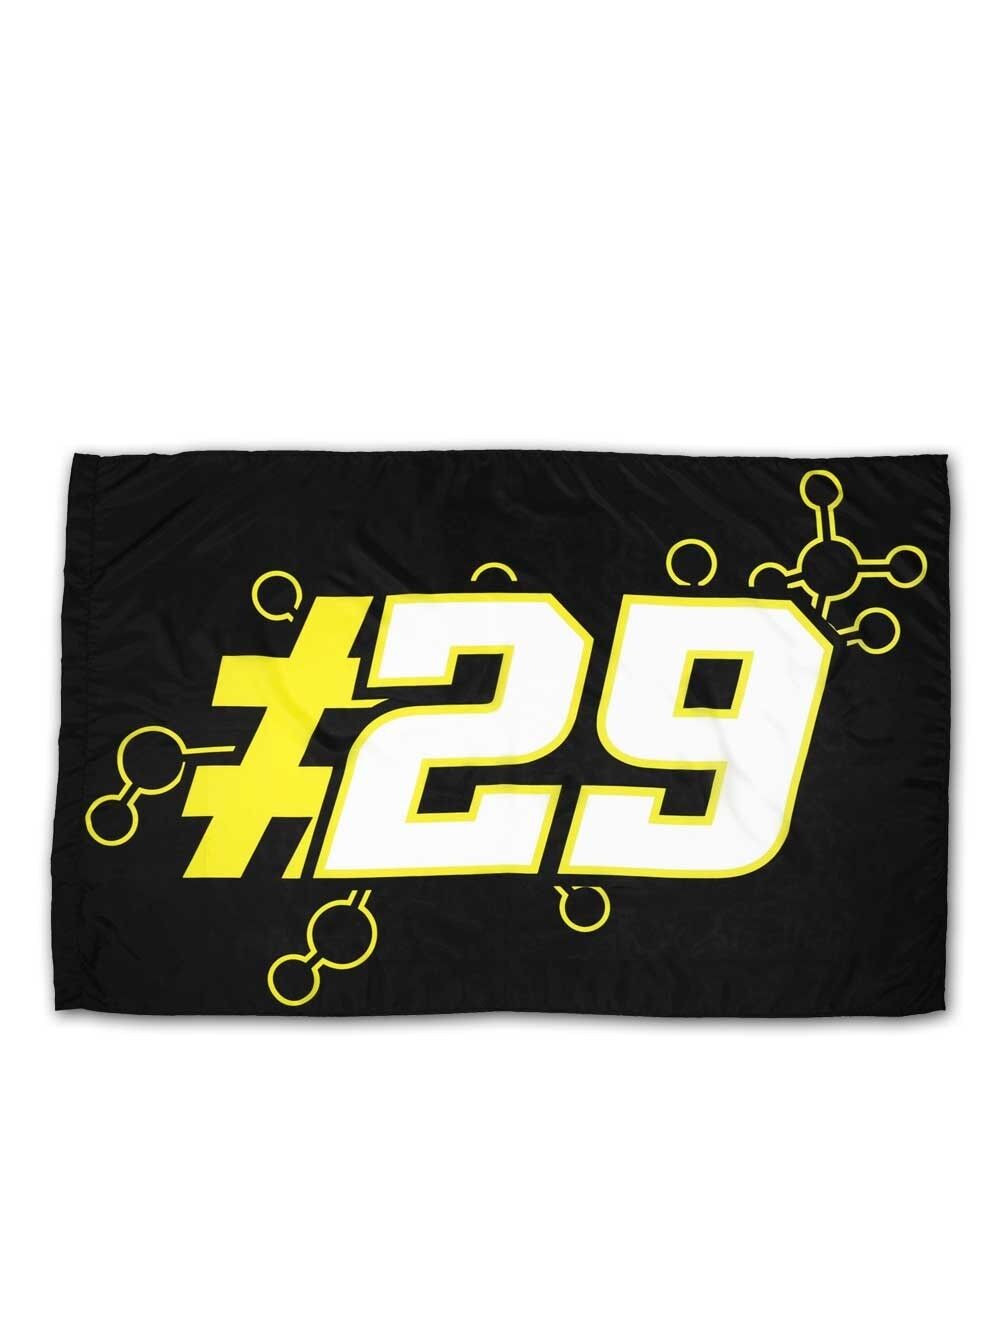 New Official Andrea Ianonne 29 Flag - 15 59005